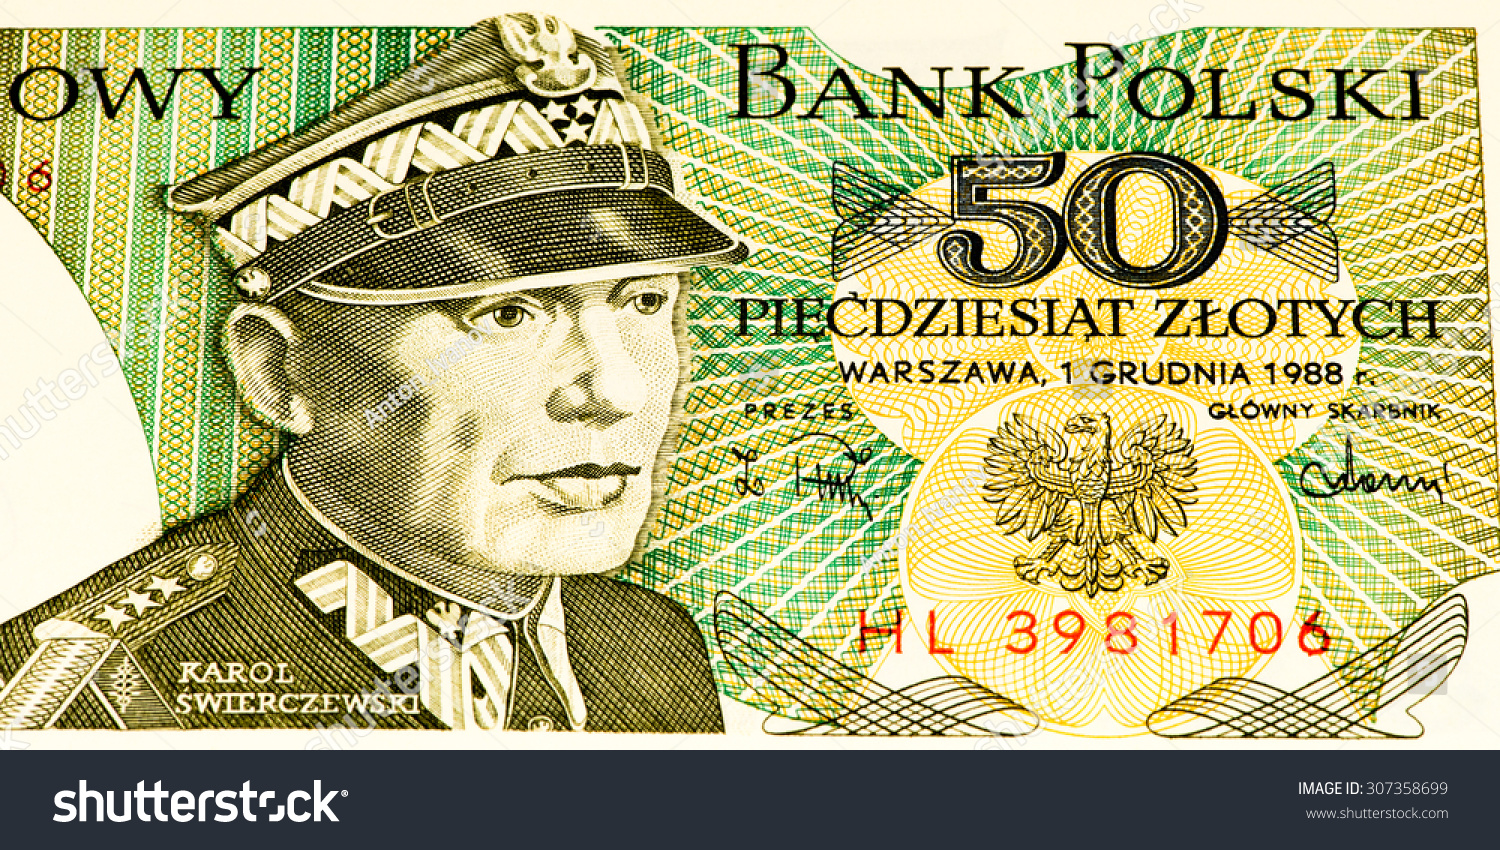 VELIKIE LUKI, RUSSIA - JULY 30, 2015: 50 Polish zloty bank note. Zloty is the national currency of Poland #307358699